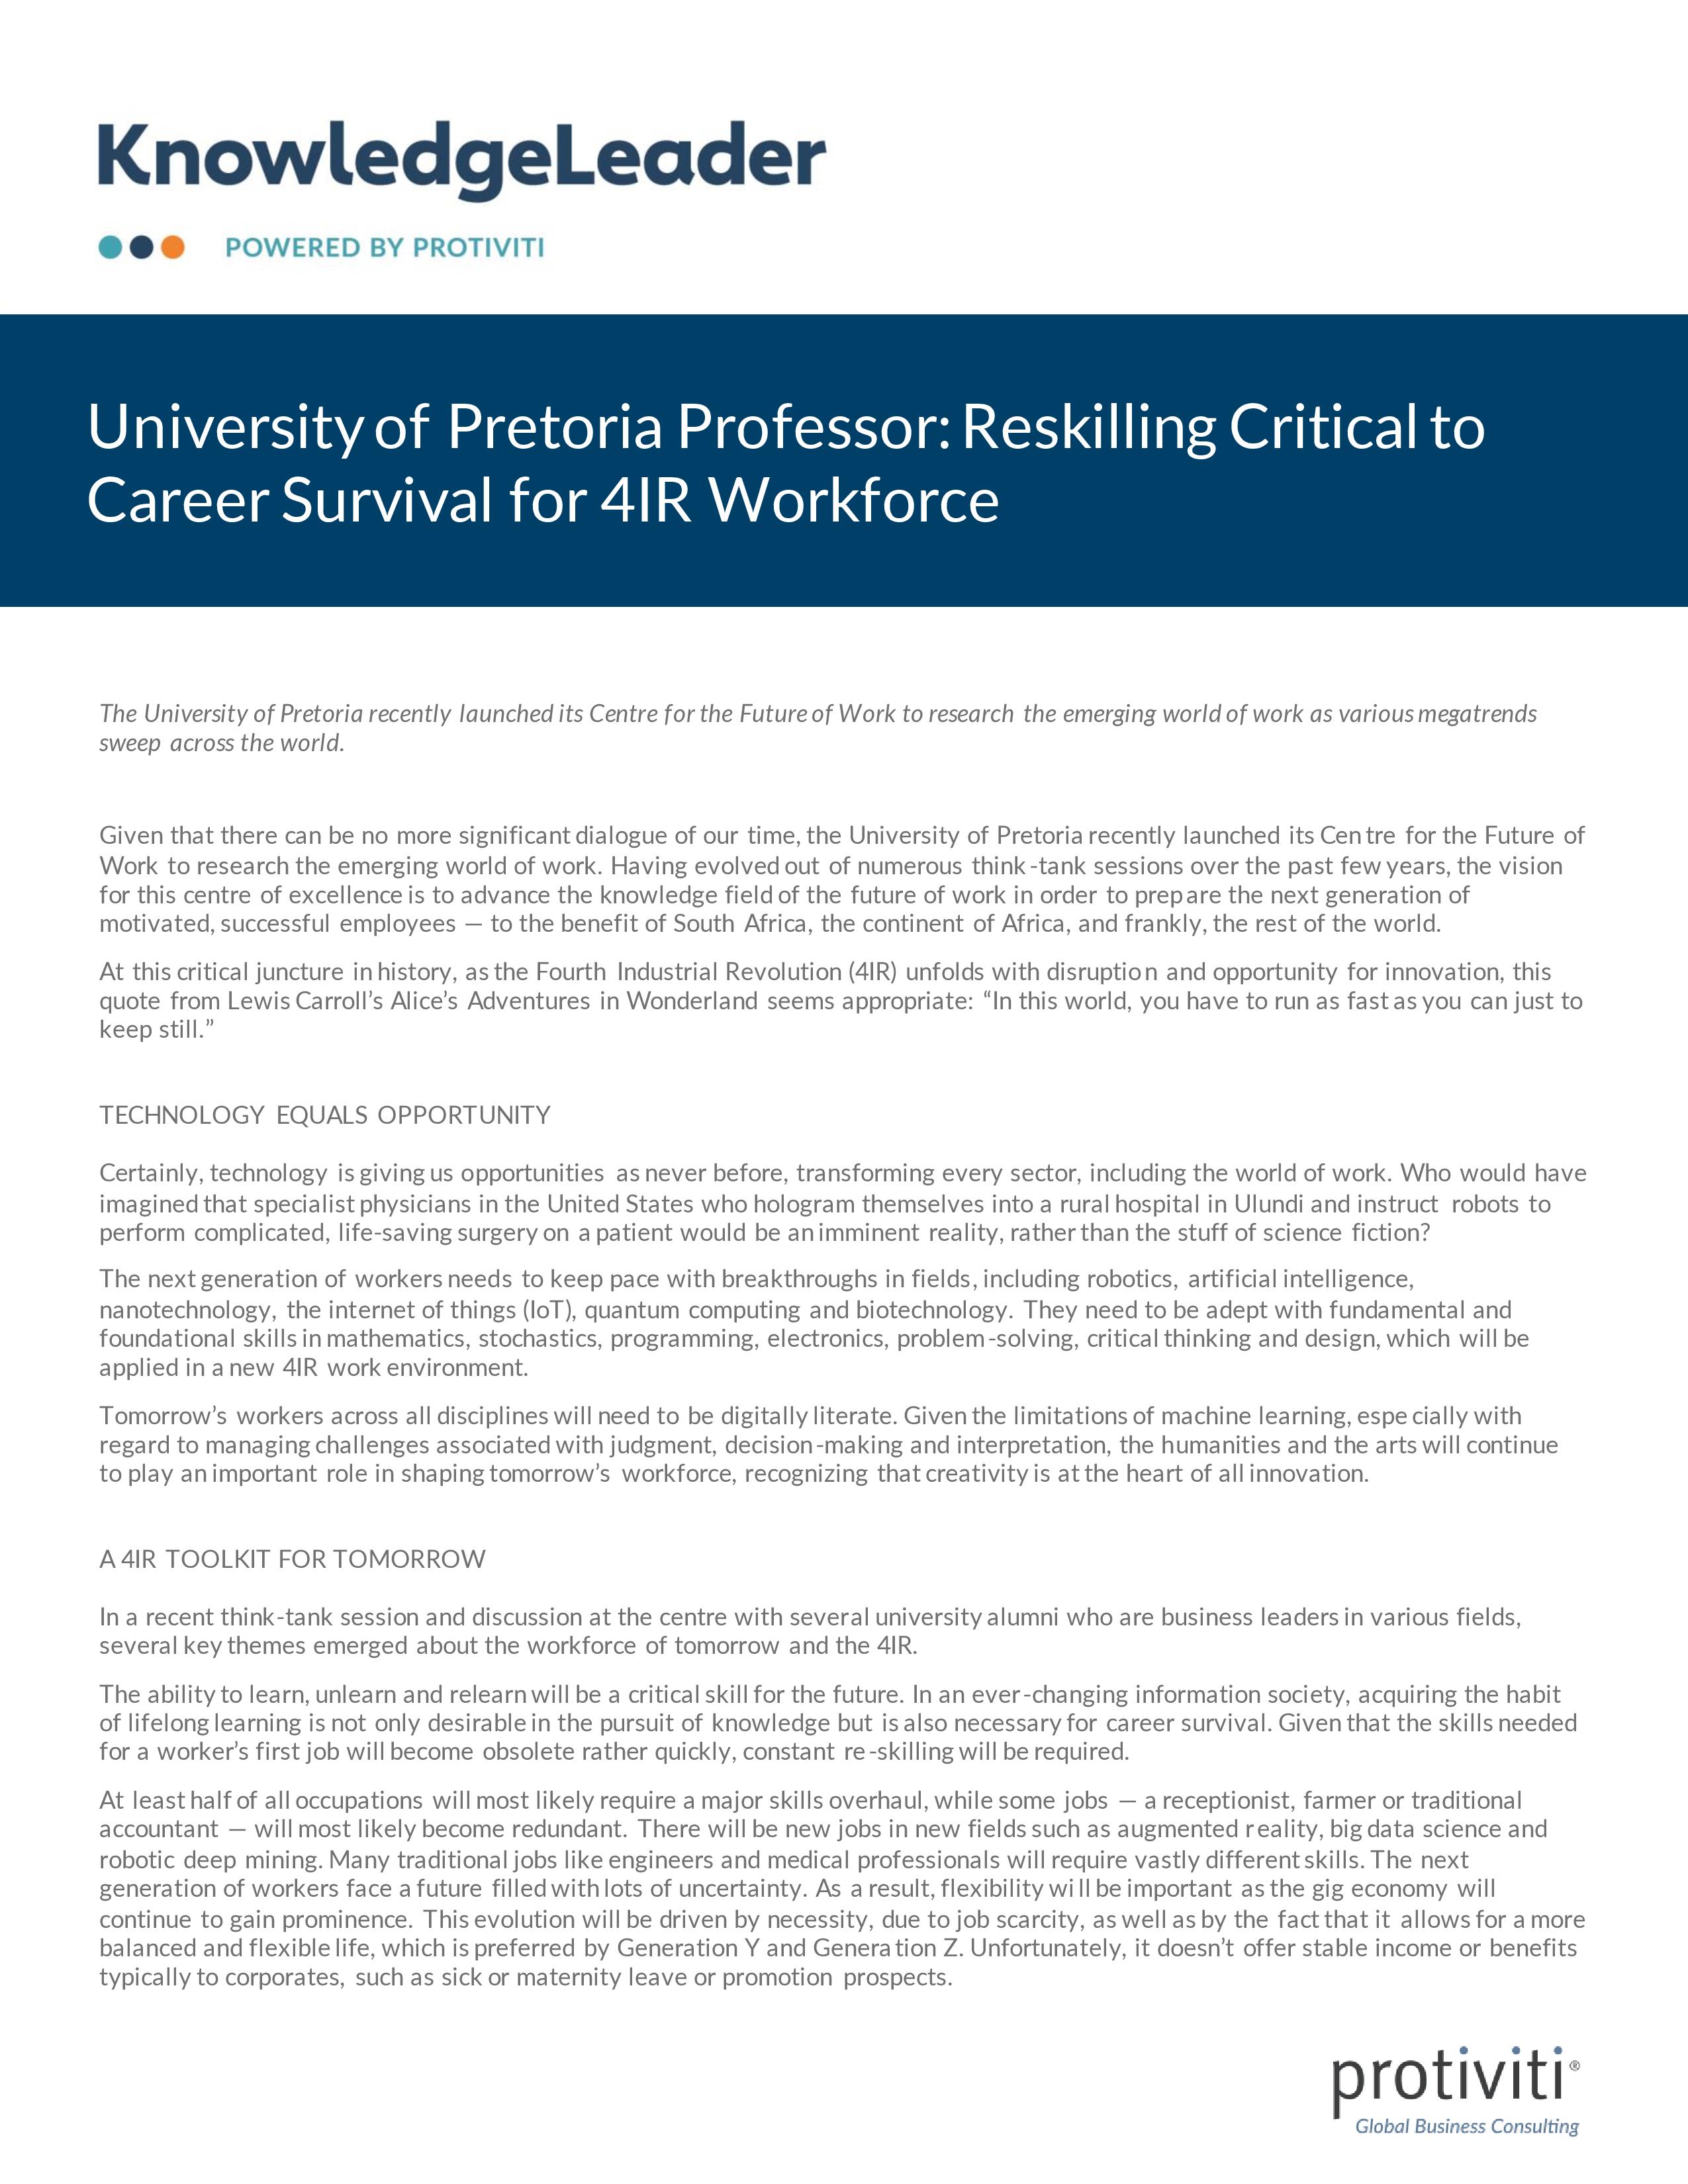 Screenshot of the first page of University of Pretoria Professor Reskilling Critical to Career Survival for 4IR Workforce